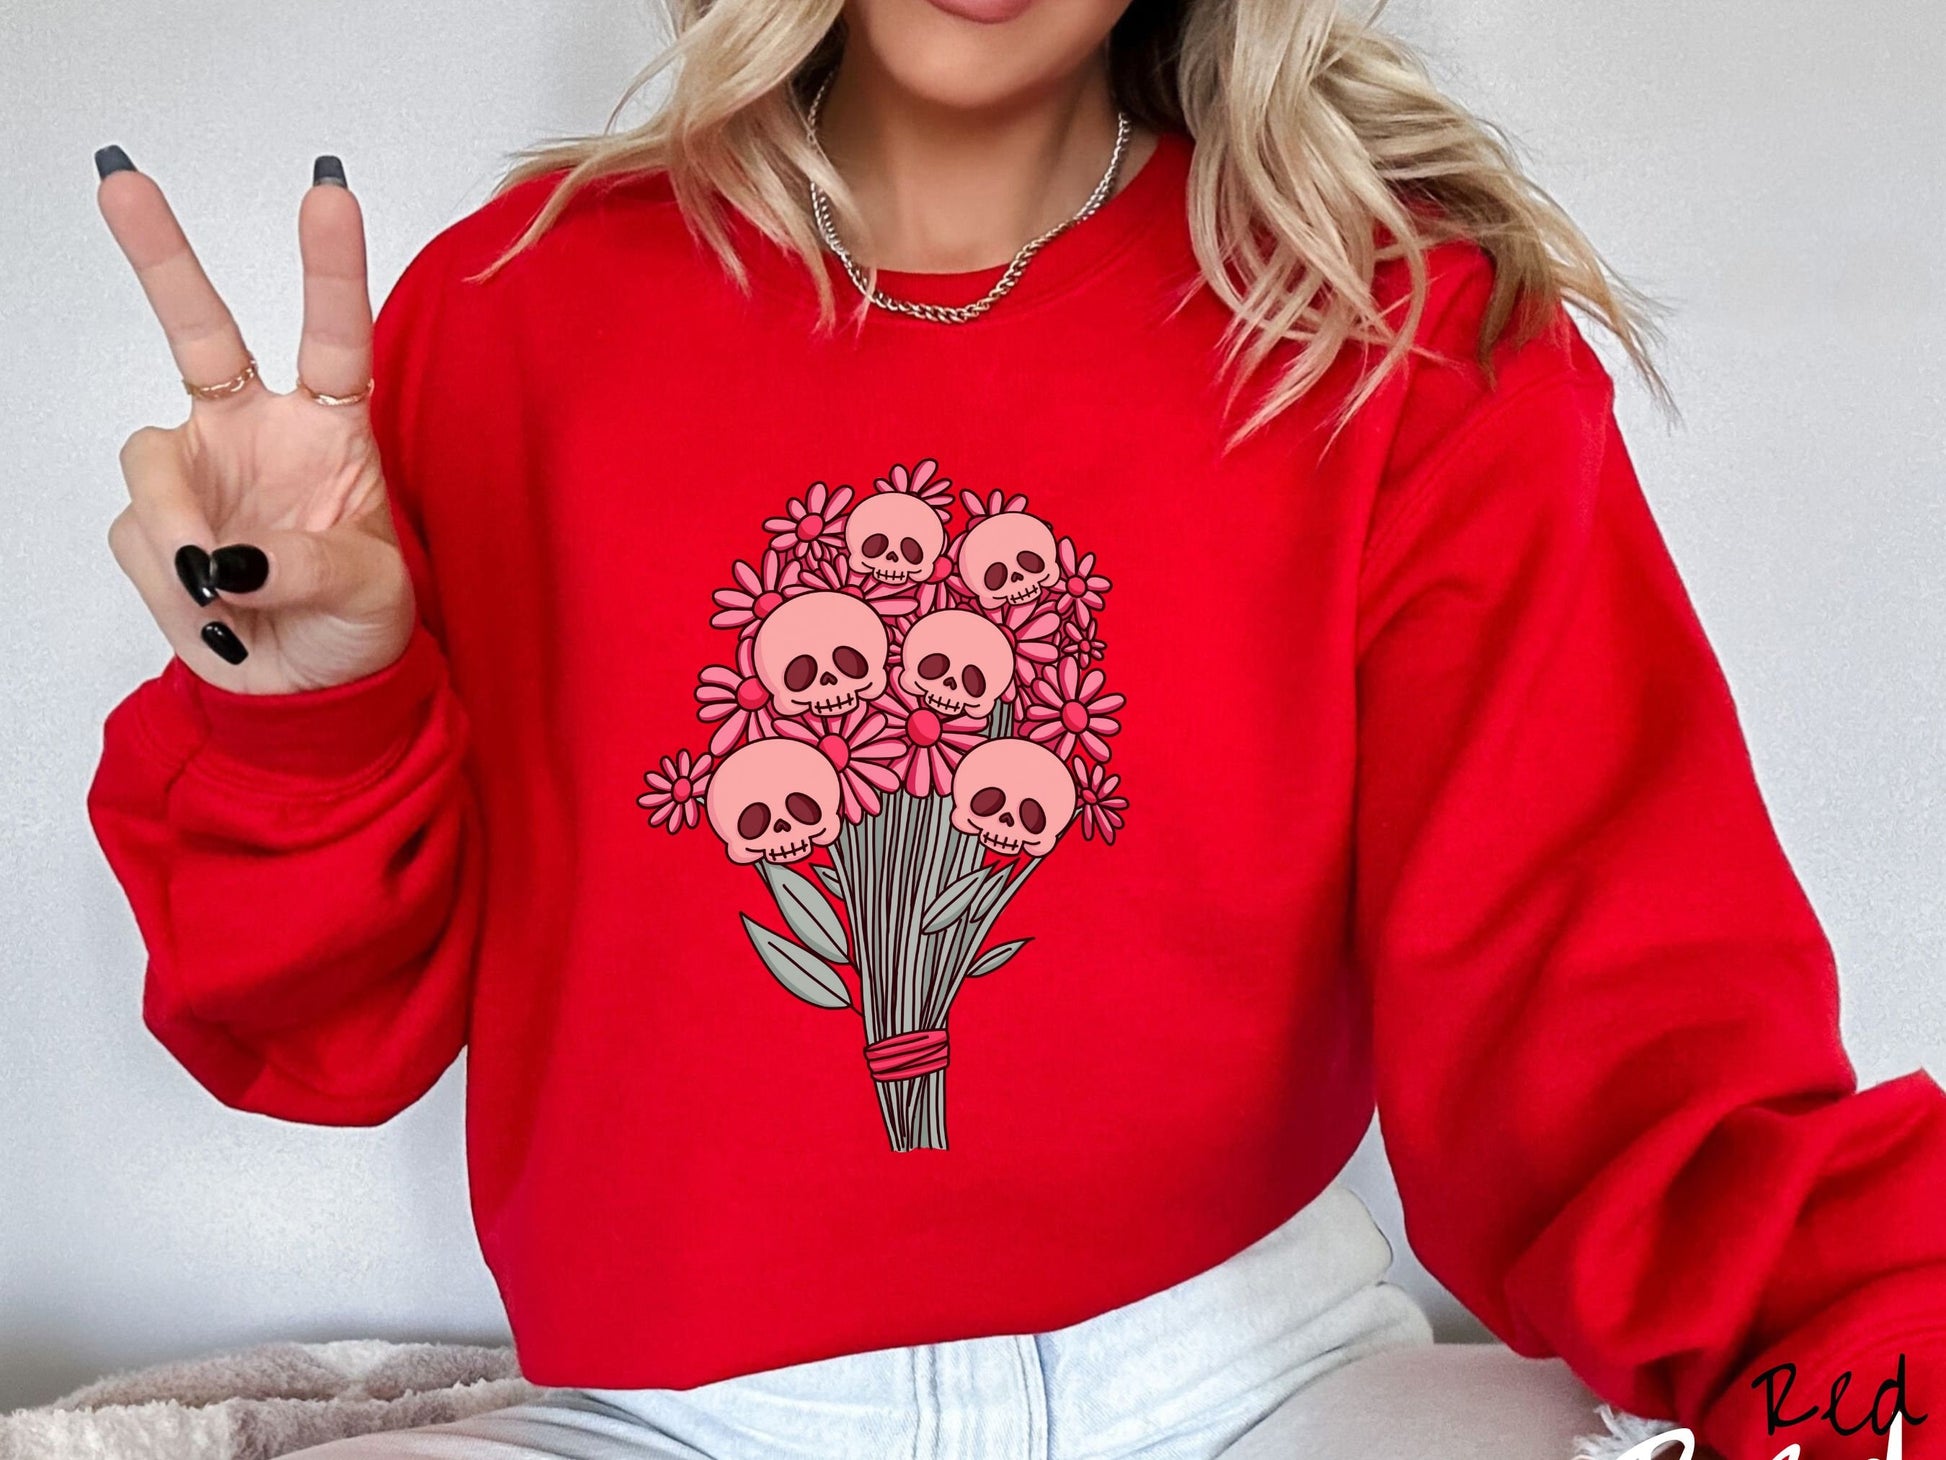 A woman wearing a cute red colored sweatshirt with a spooky flower bouquet with skull heads as the flowers among pink colored flowers.